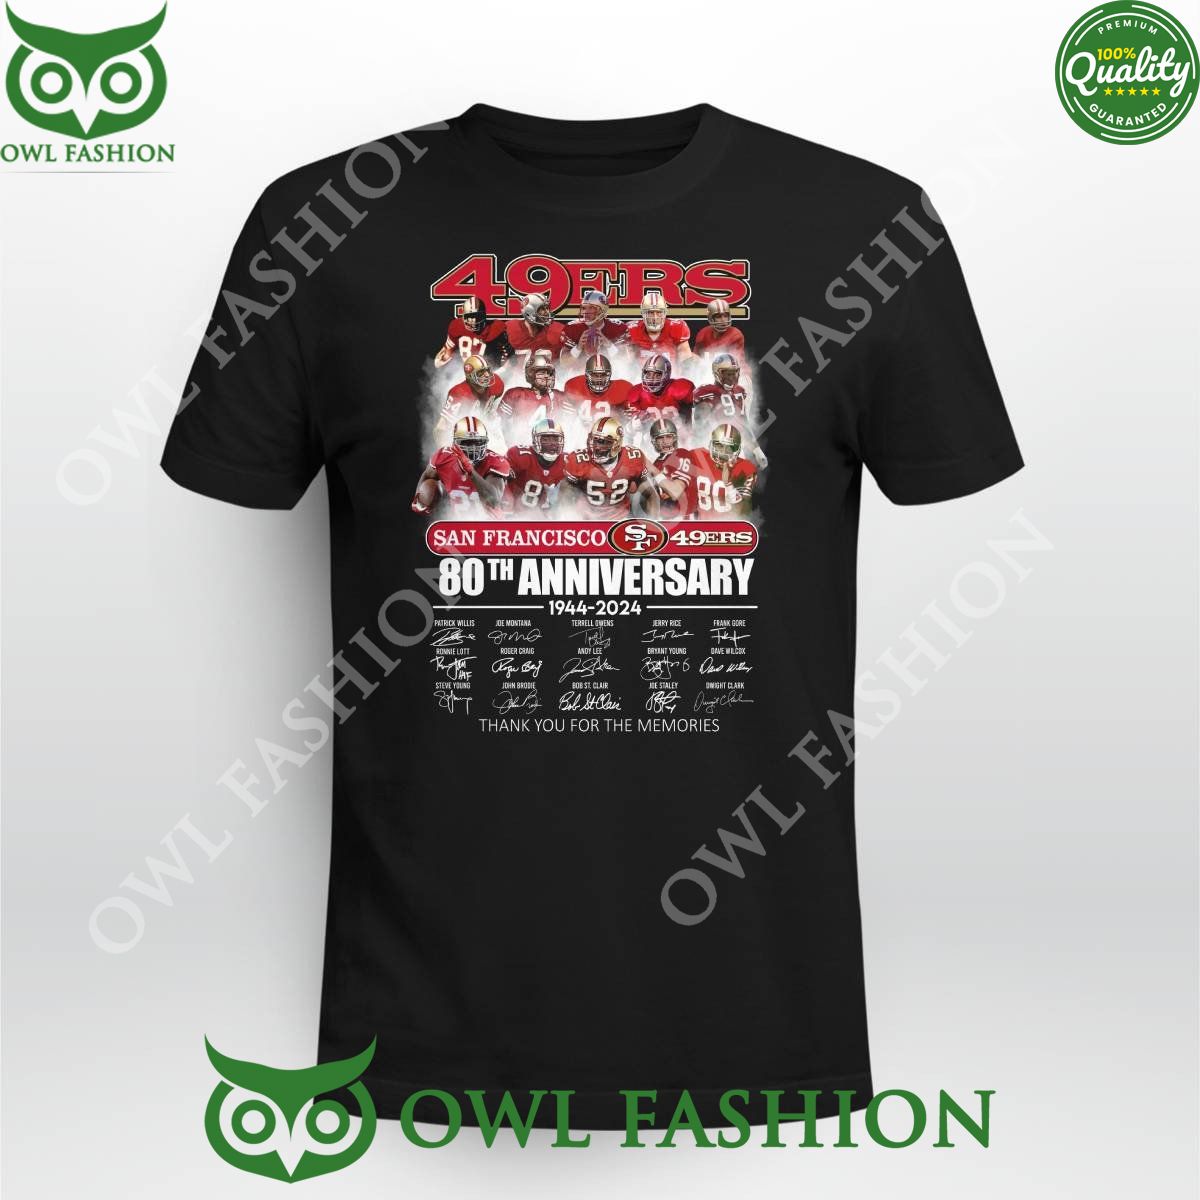 nfl 49ers san francisco thank you for the memories 80 years t shirt 1 Nm6jy.jpg